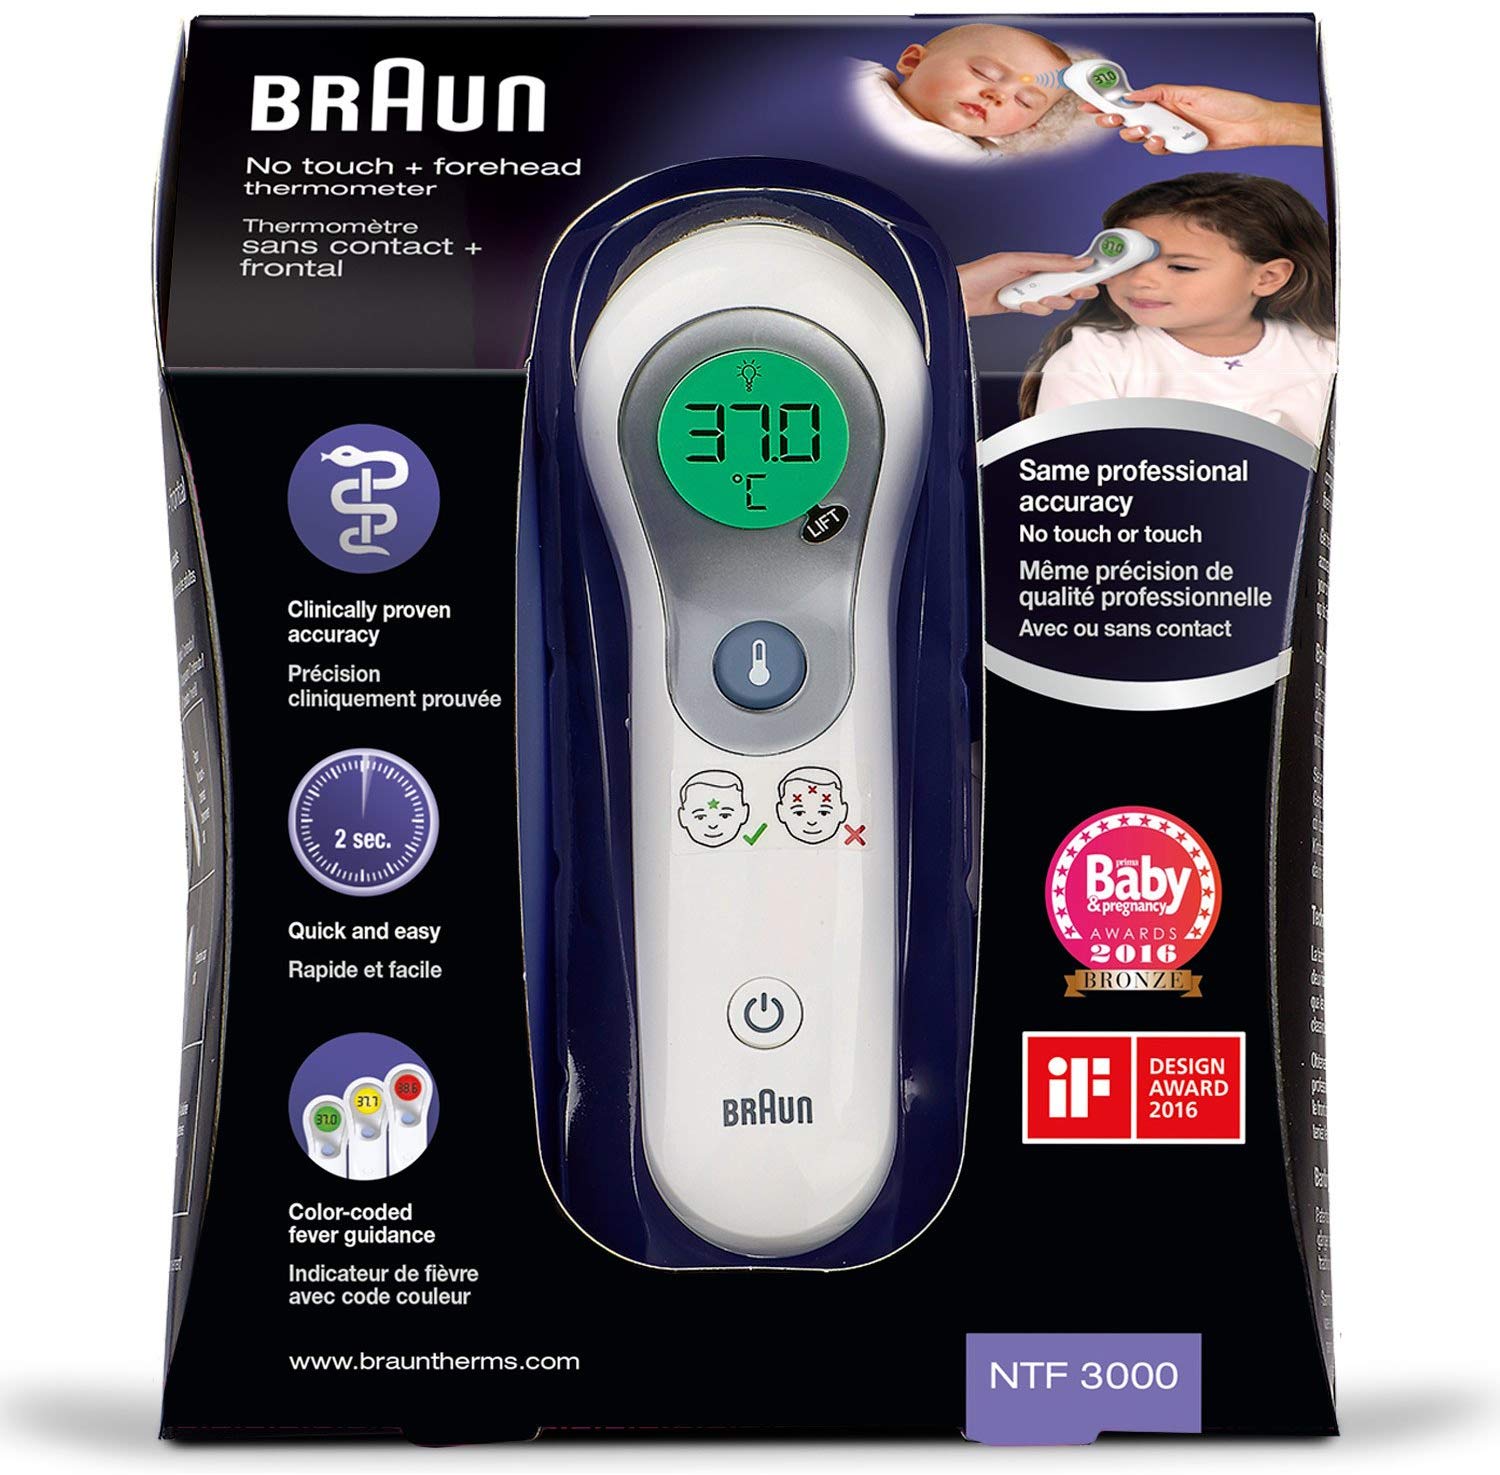 Braun No touch Digital Thermometer